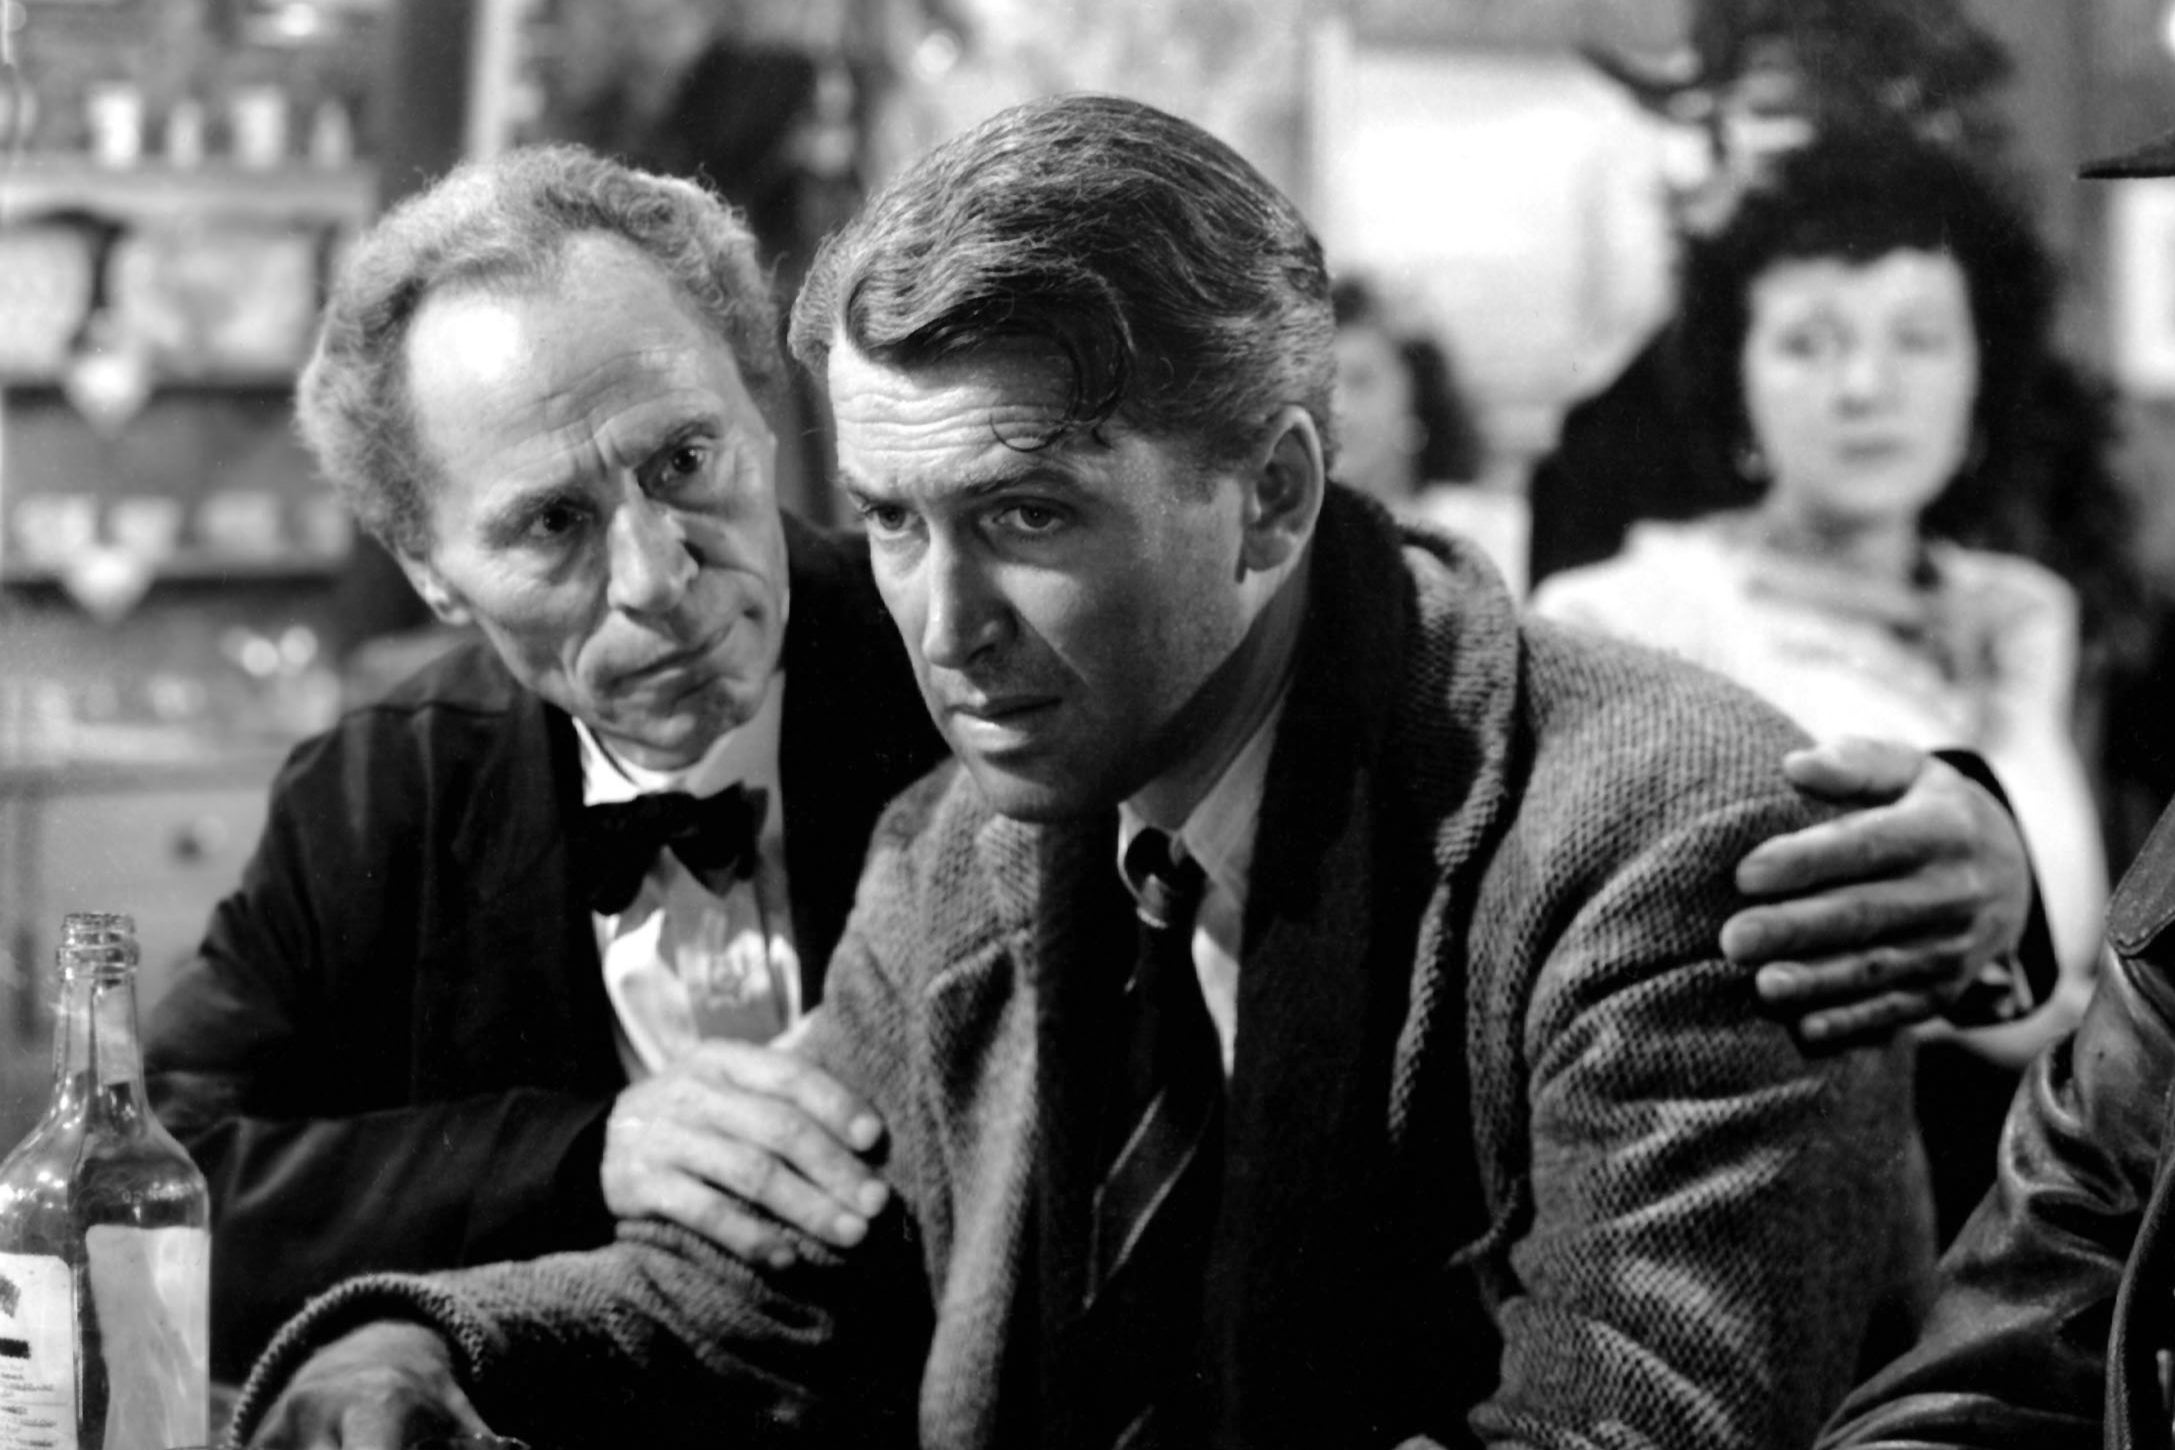 ‘I wish I had a million dollars’: William Edmunds and James Stewart in ‘It’s a Wonderful Life'